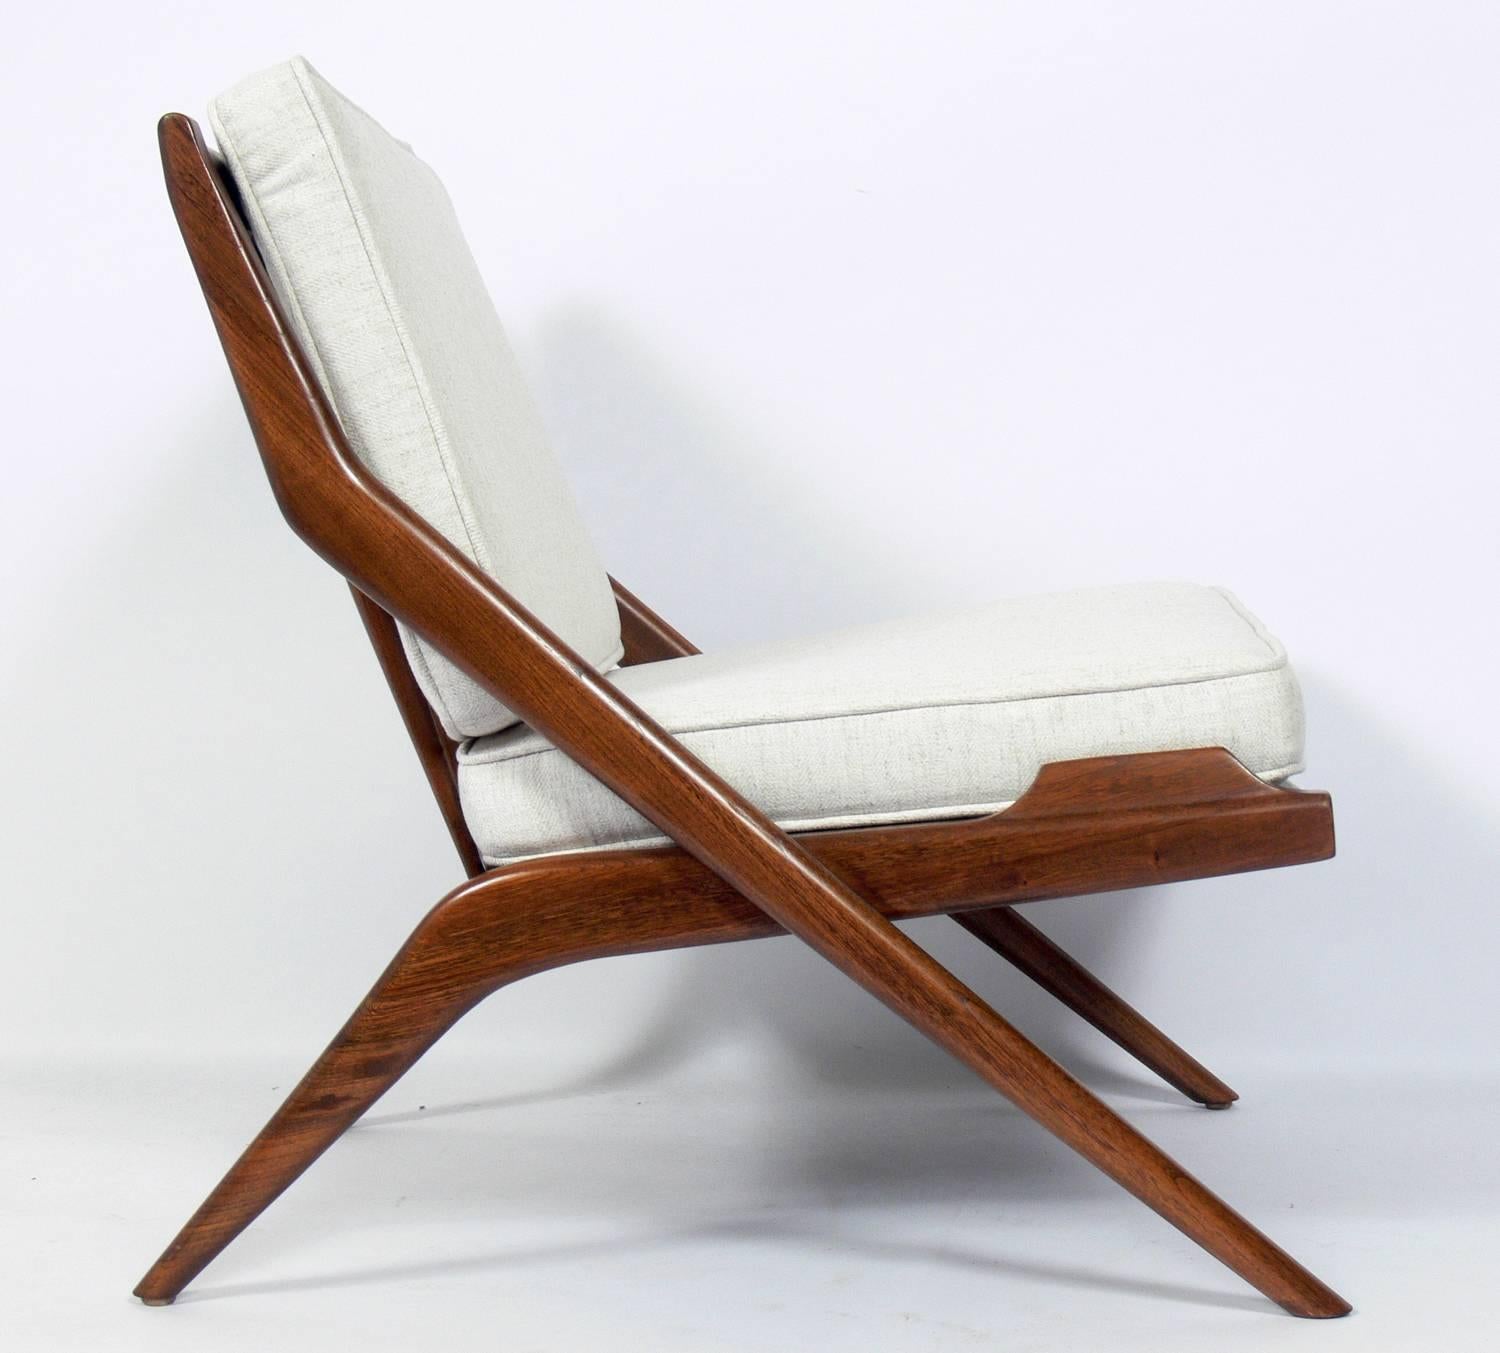 Danish modern scissor lounge chair, in the manner of Folke Ohlsson, circa 1960s. Refinished and reupholstered in an ivory color herringbone upholstery.